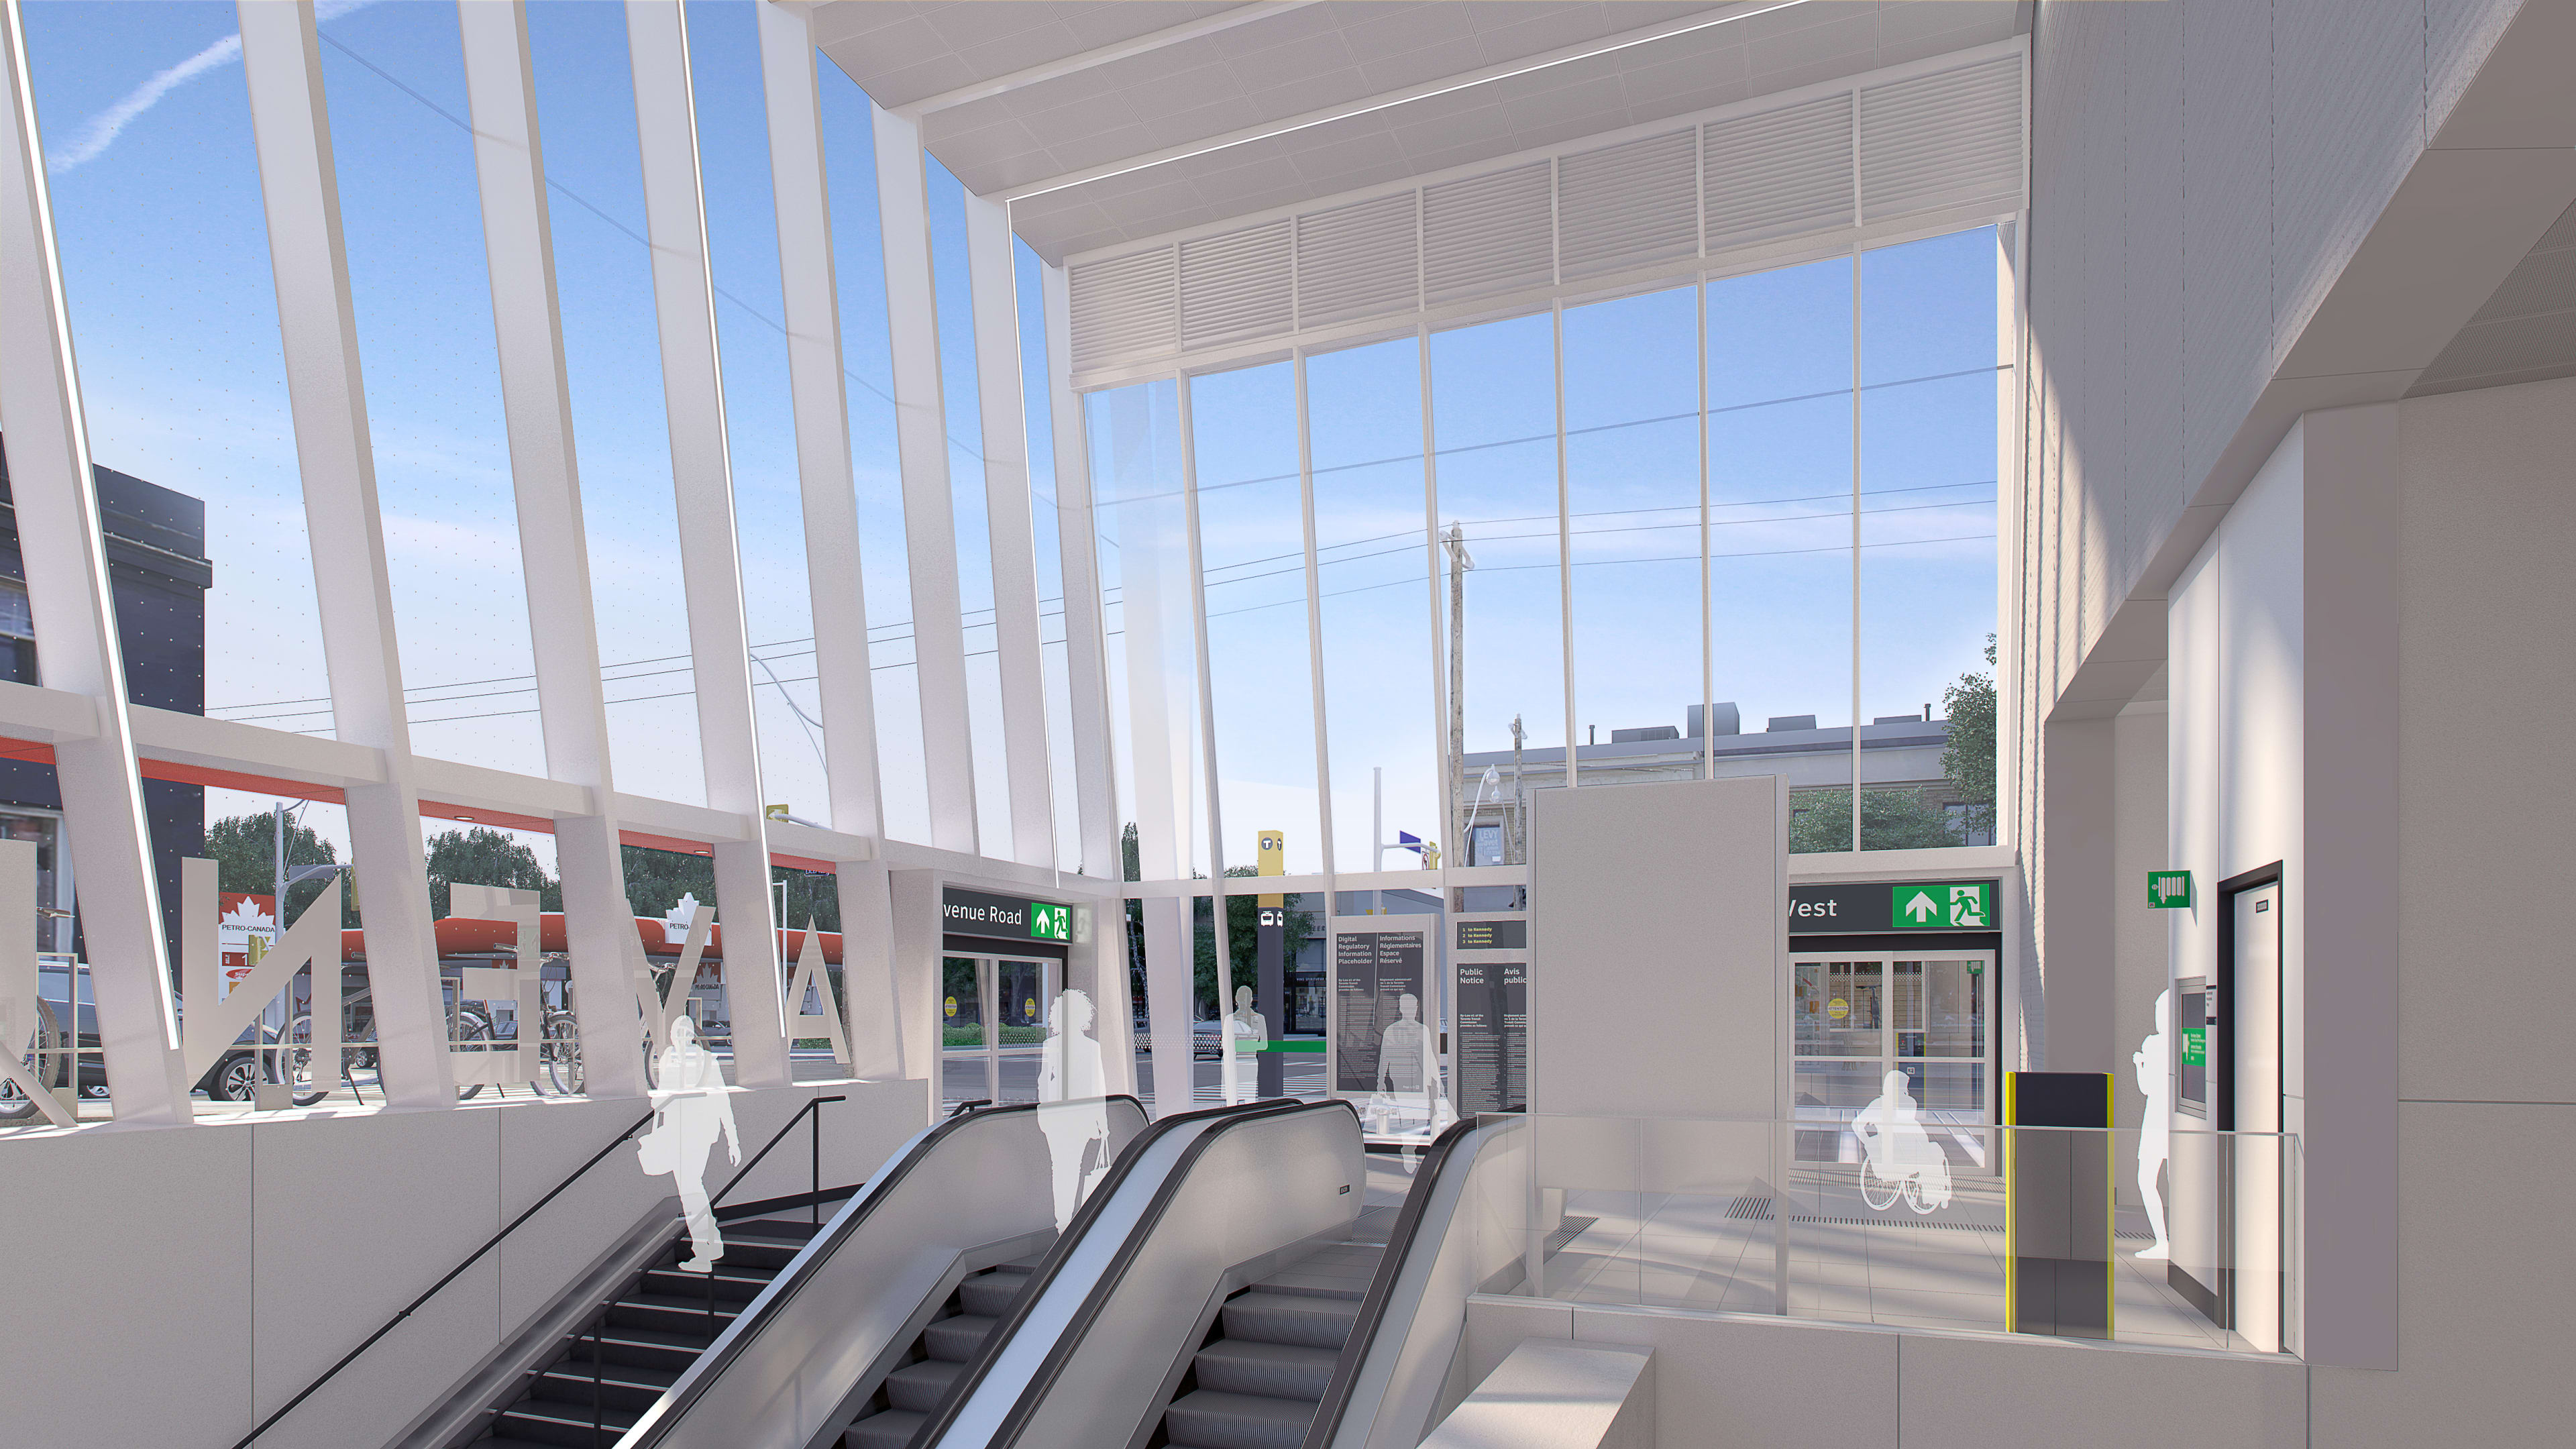 Customers and escalators - lit by natural light - is shown in an artist concept.